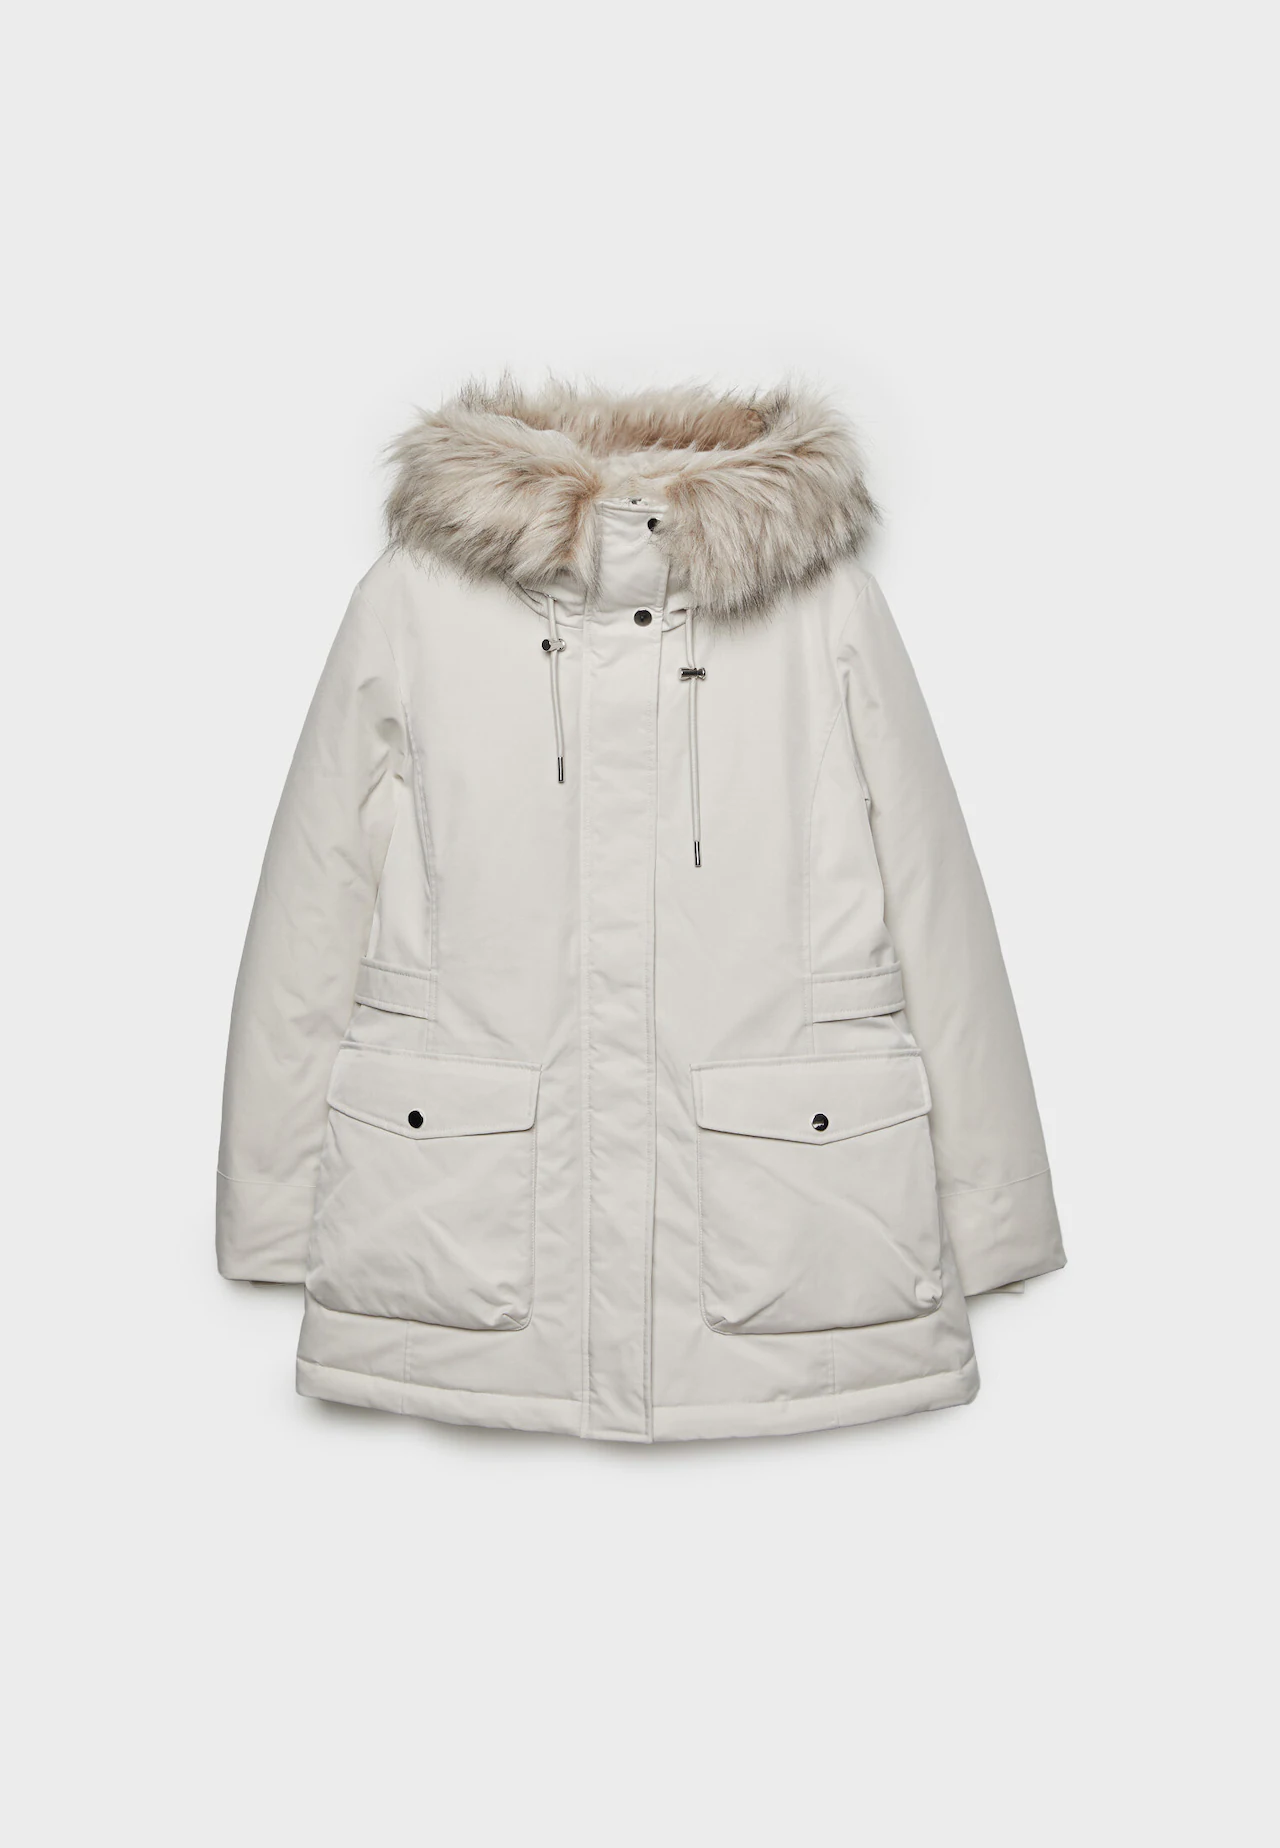 Women shiny down parka with fur Authentic